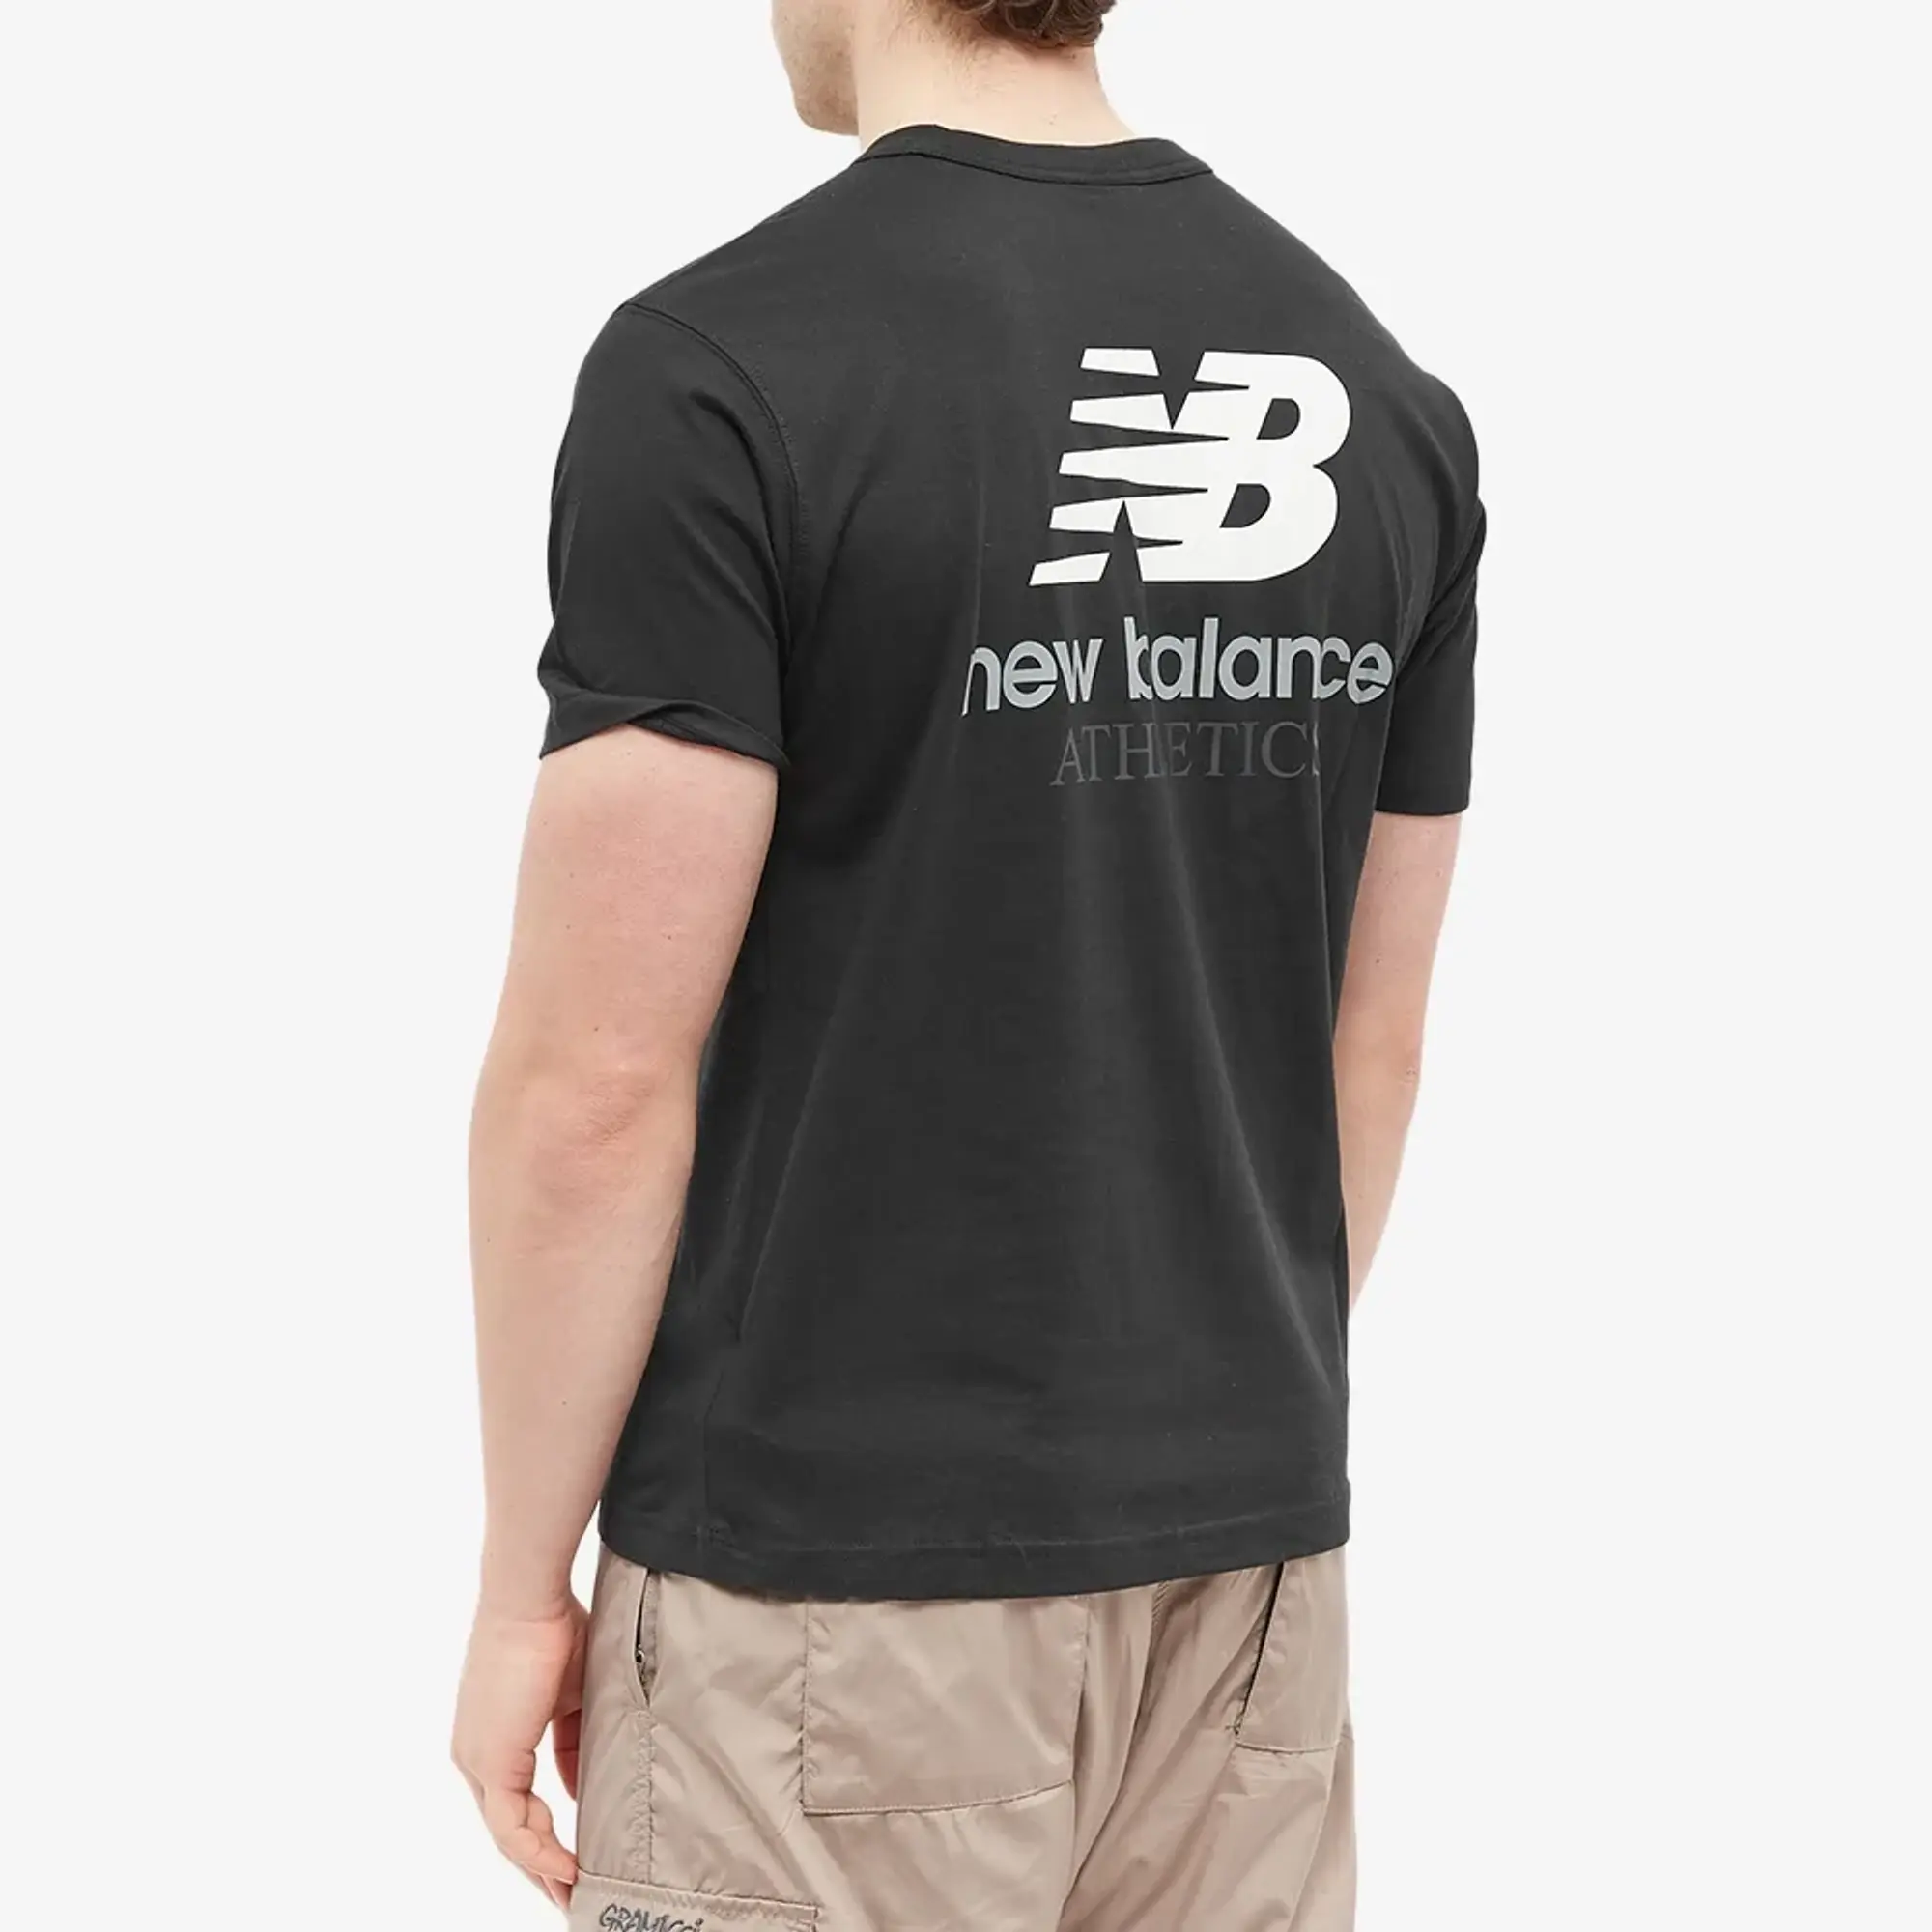 New Balance Men's Athletics Remastered Graphic Cotton Jersey Short Sleeve T-shirt in Grey